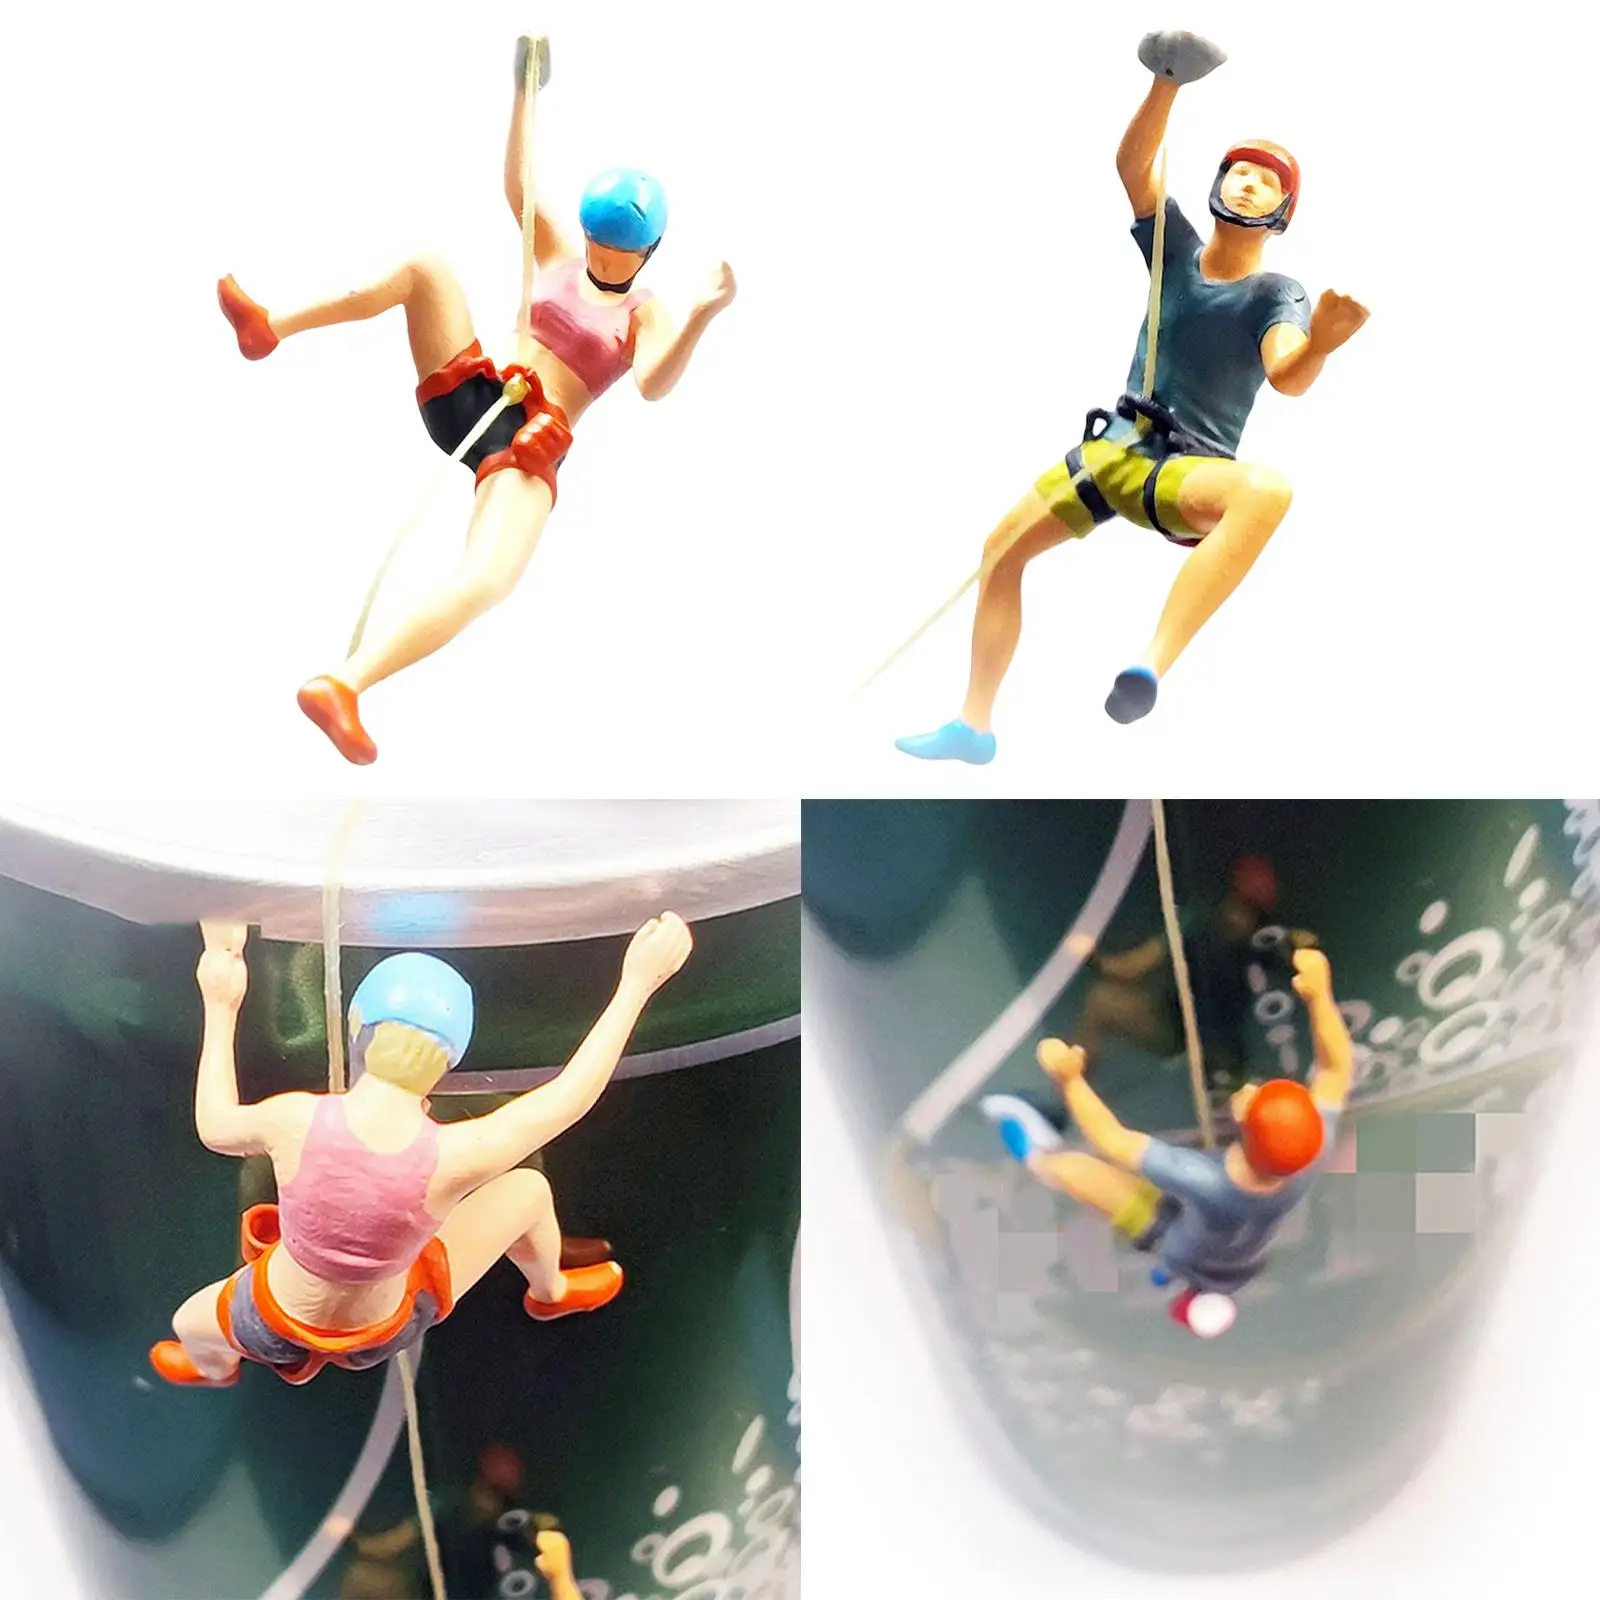 1/87 Scale Painted Figures Simulation Miniature Toy Action Figure Character